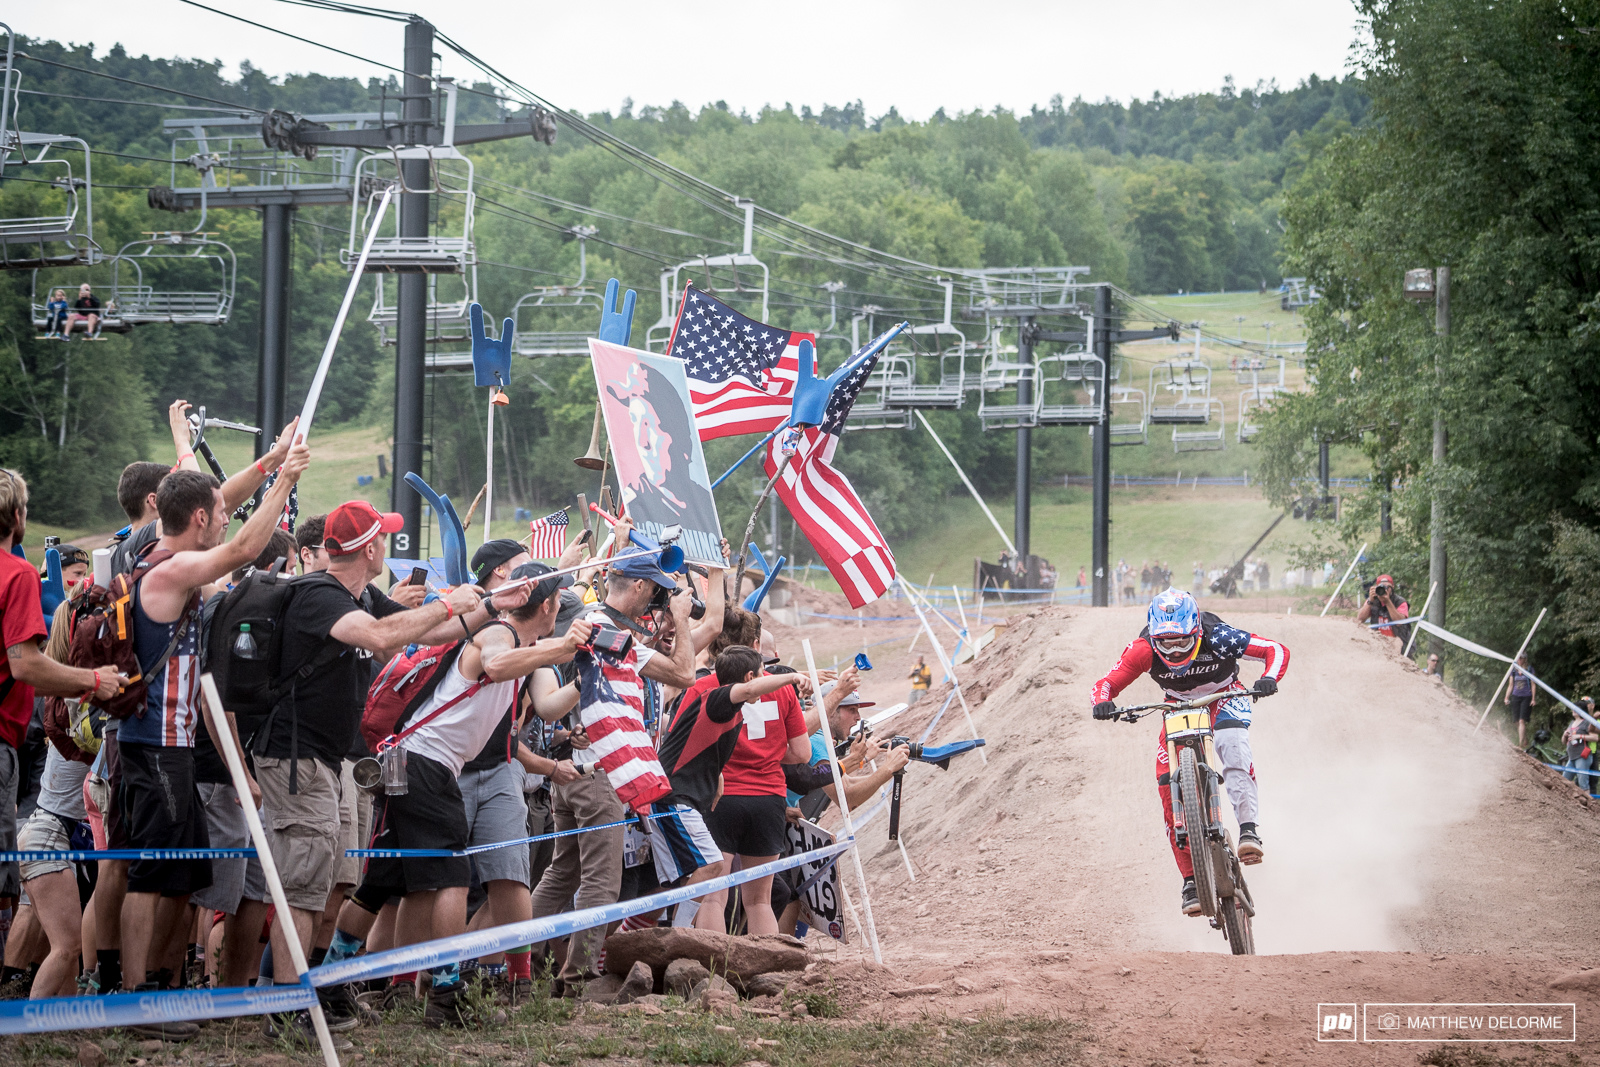 The home crowd cheering Gwin in as he stares down the finish line.